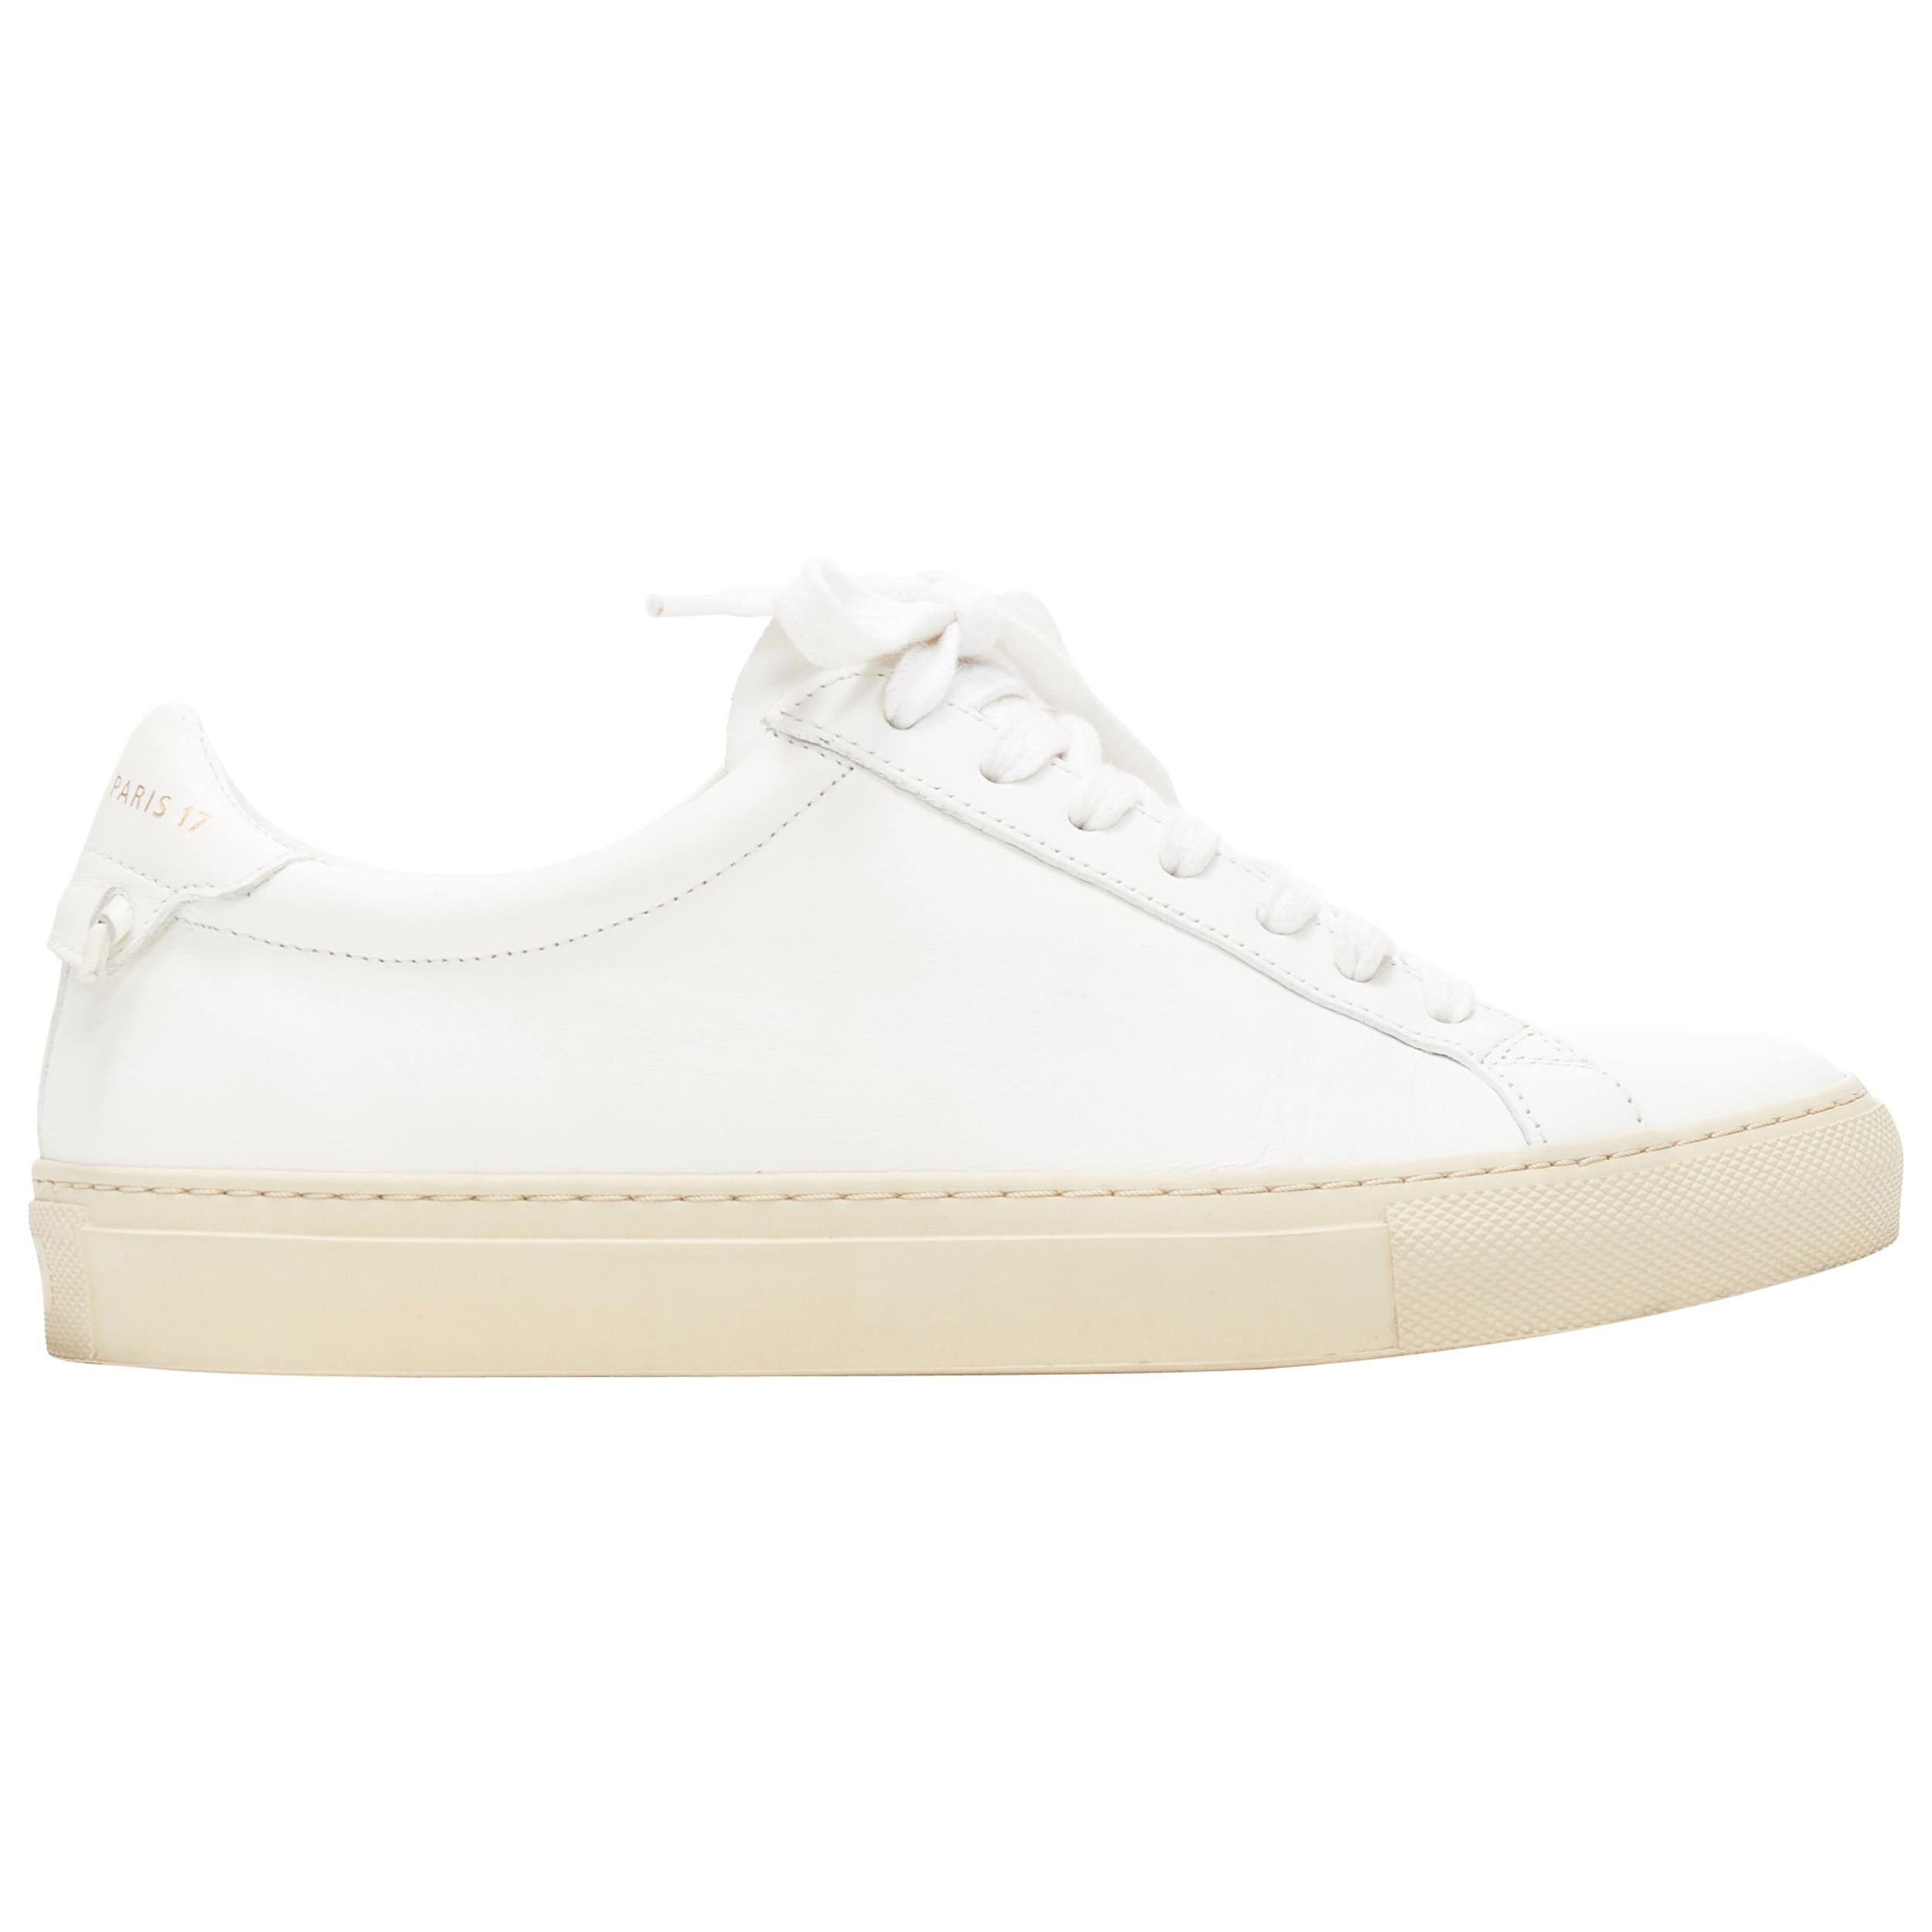 GIVENCHY Paris 17 white leather lace up minimalist low top sneakers EU37.5  at 1stDibs | givenchy paris sneakers, givenchy paris 17 sneakers, givenchy  paris shoes